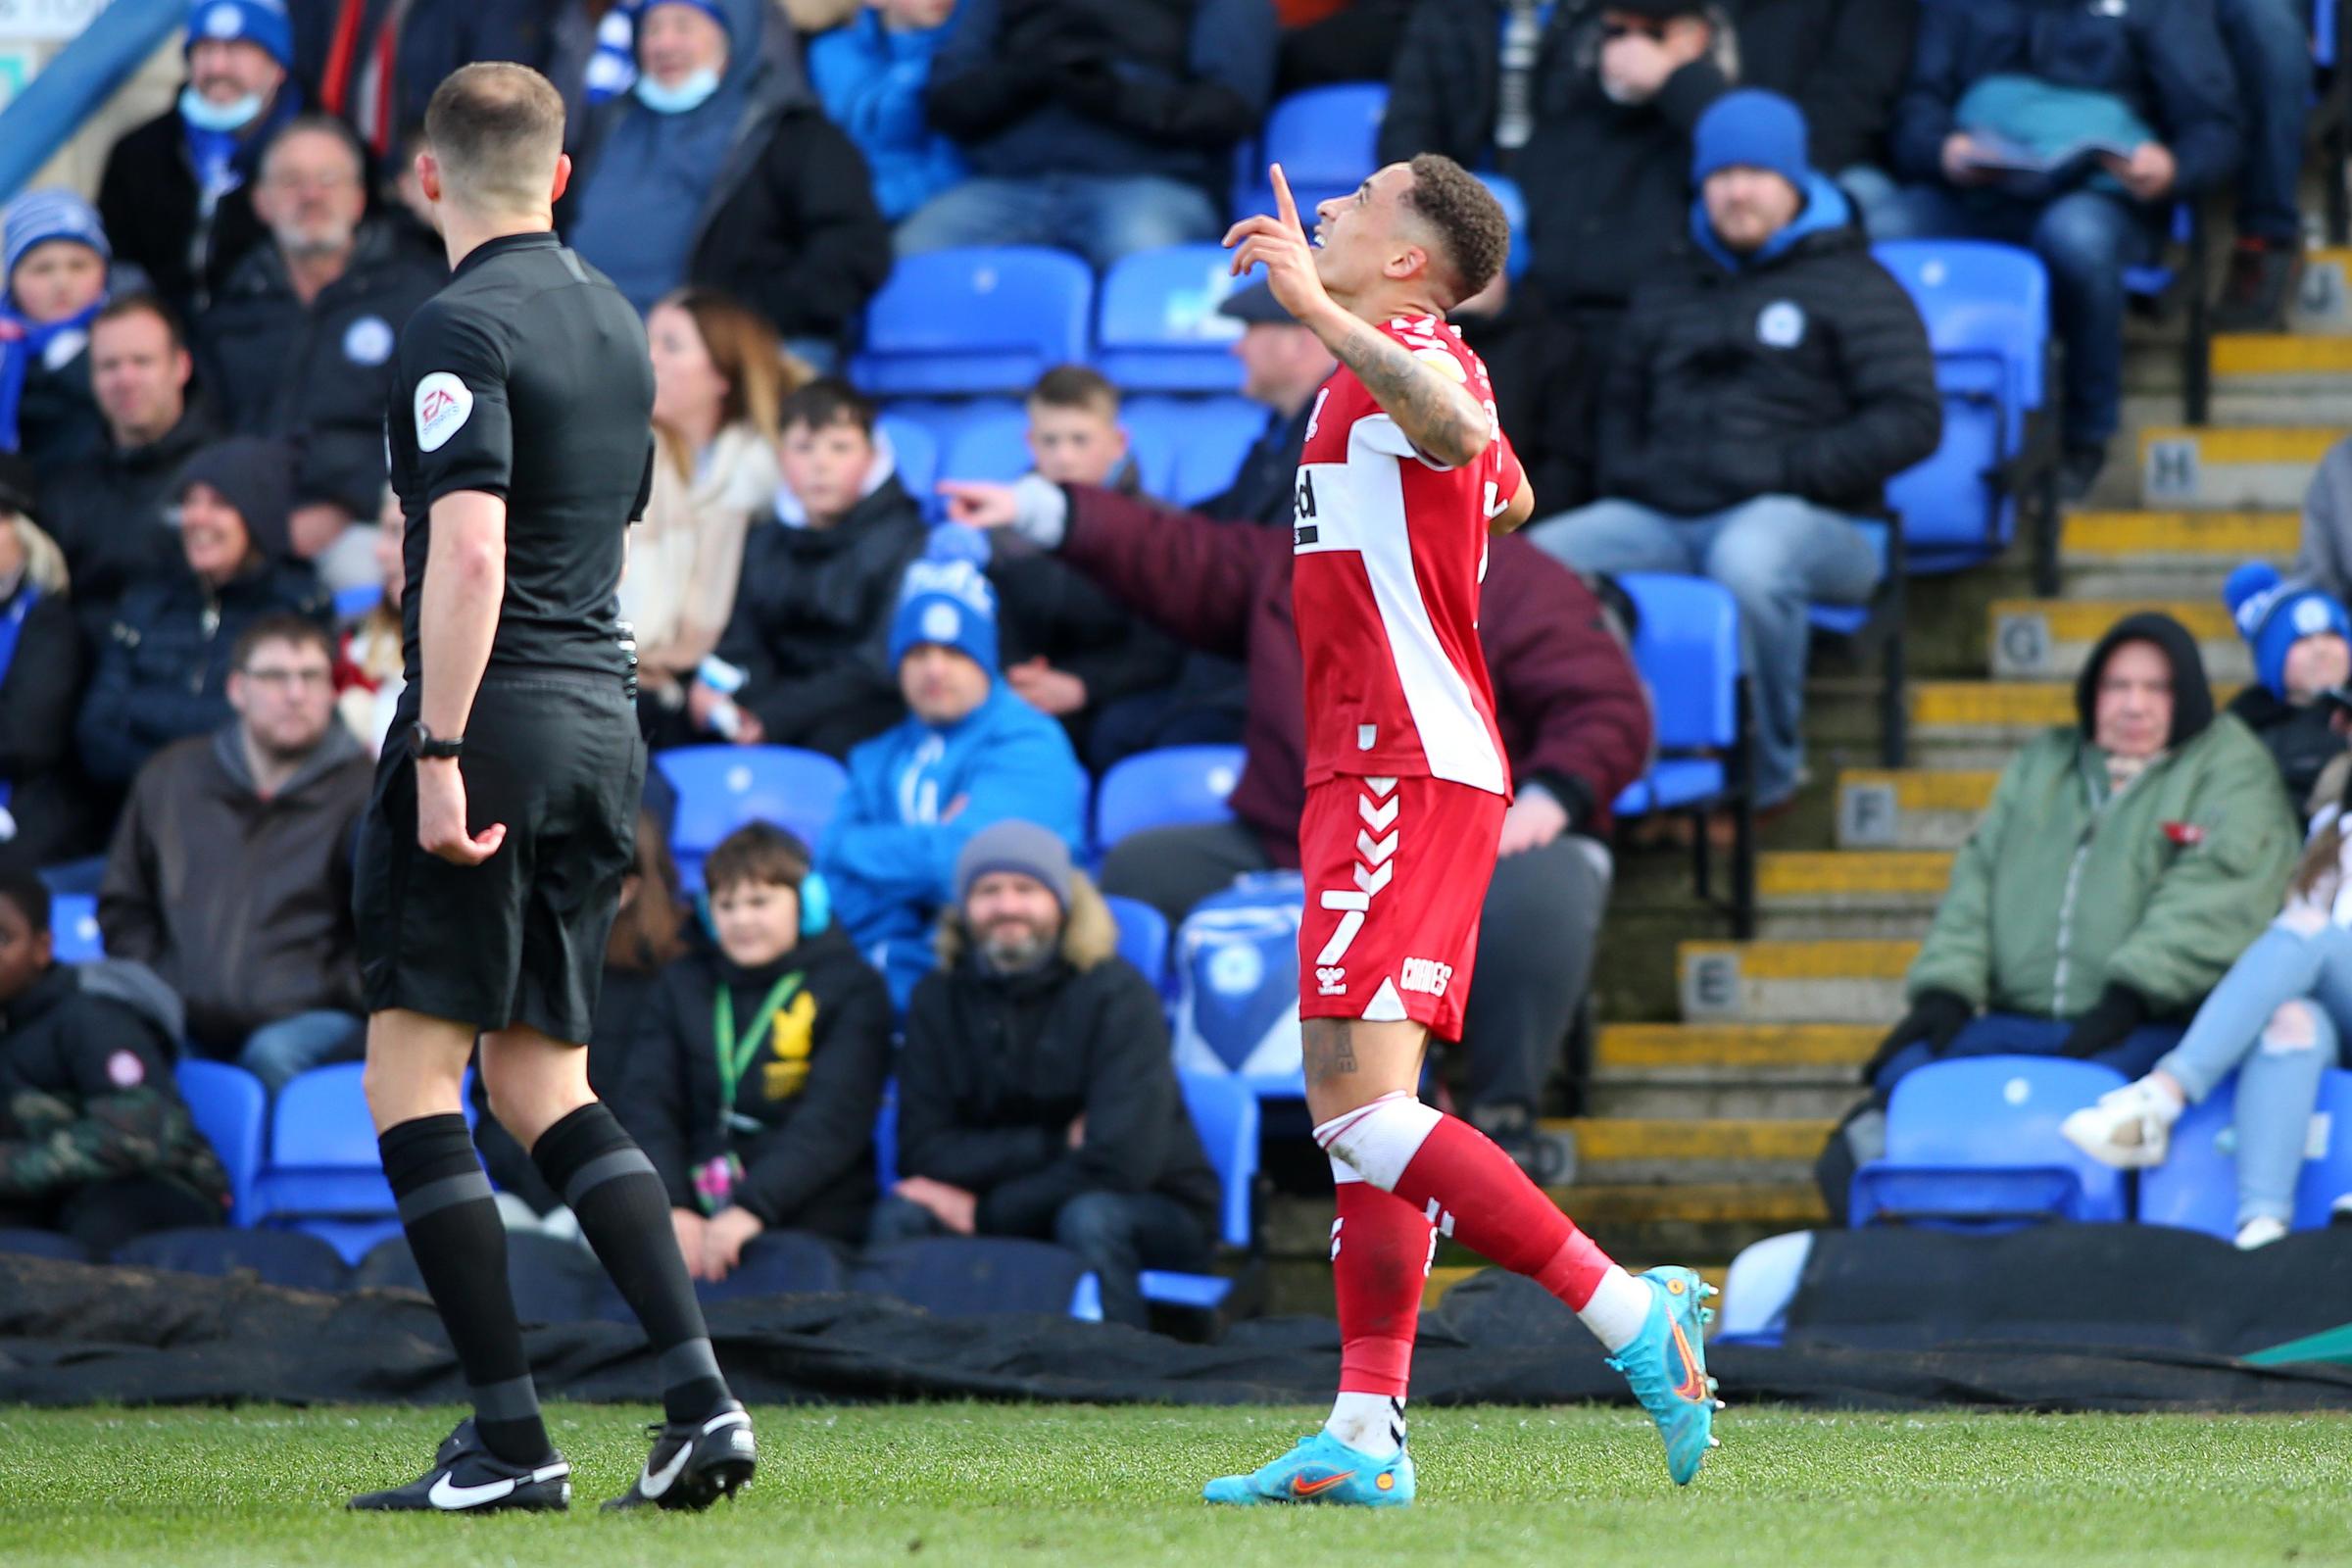 Marcus Tavernier on Boro's play-off push: 'We just need to take it a game at a time'